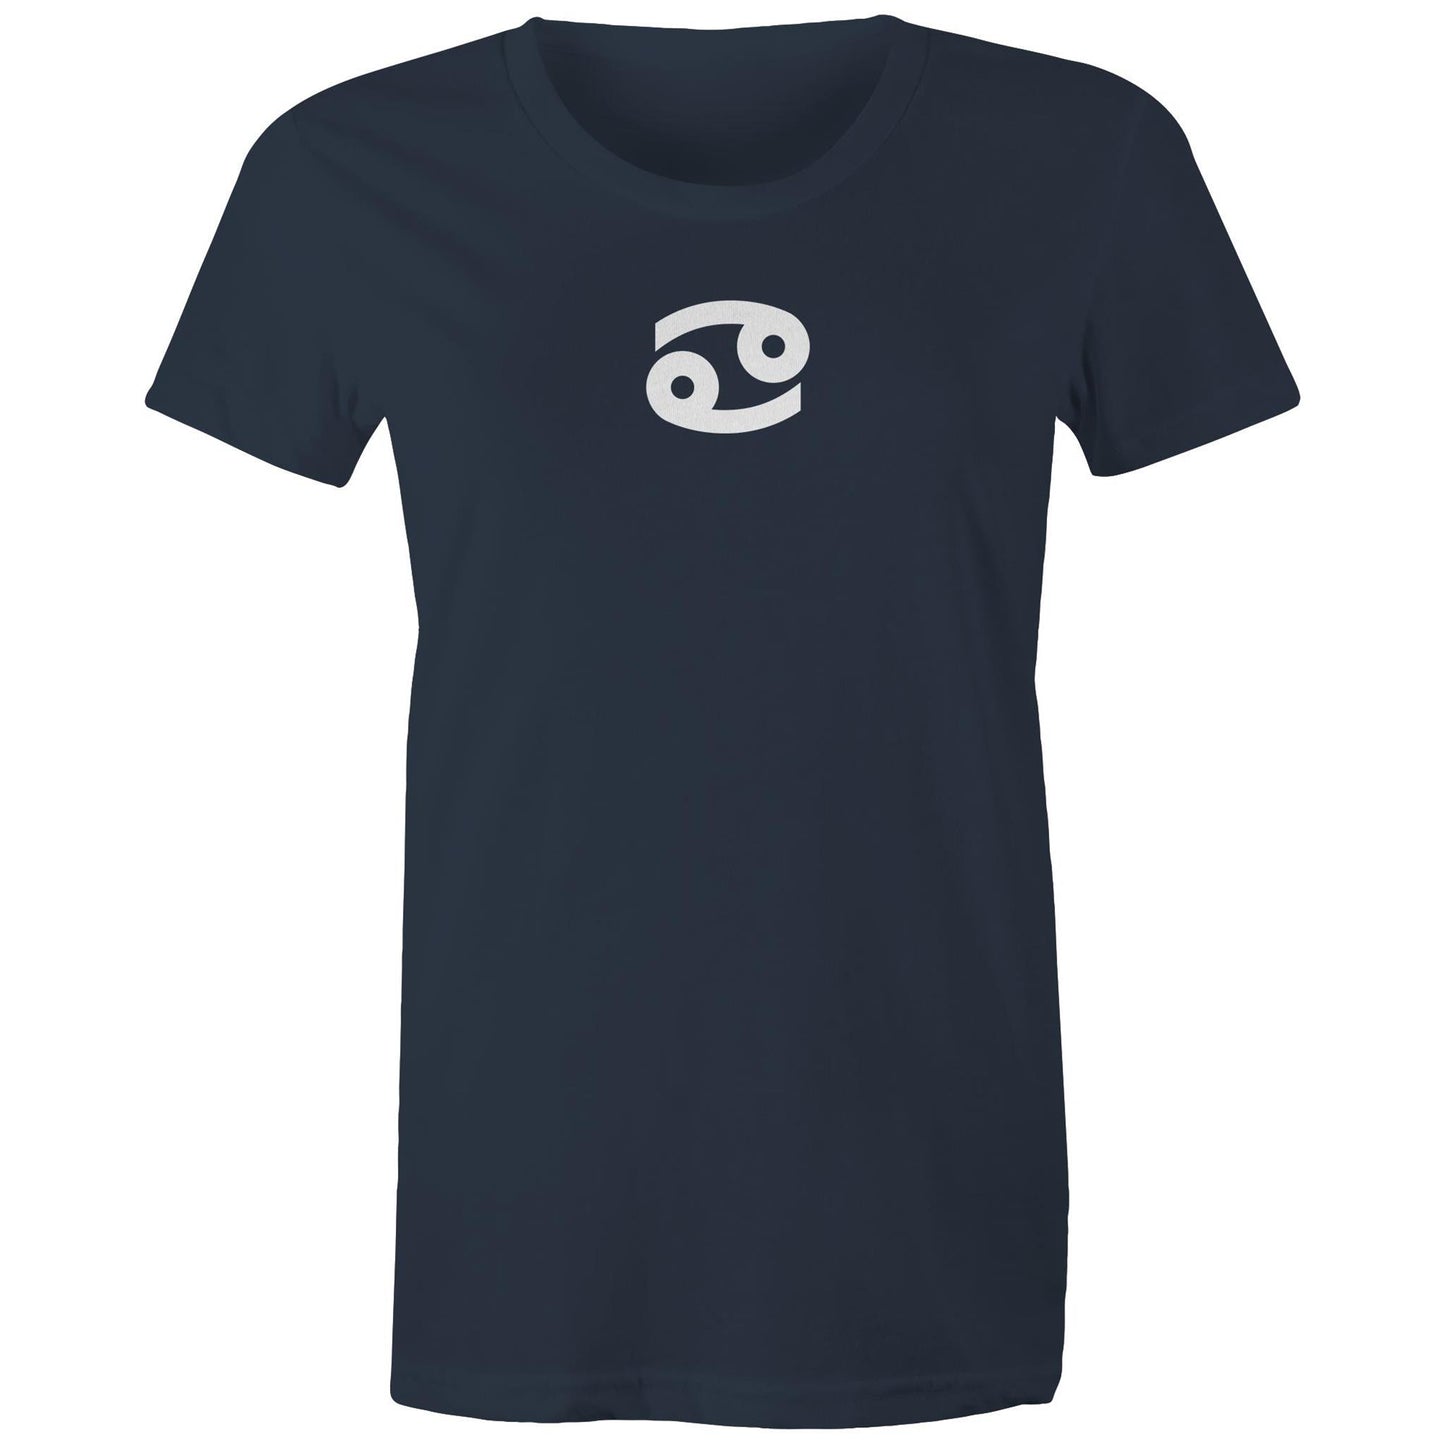 Cancer T Shirts for Women